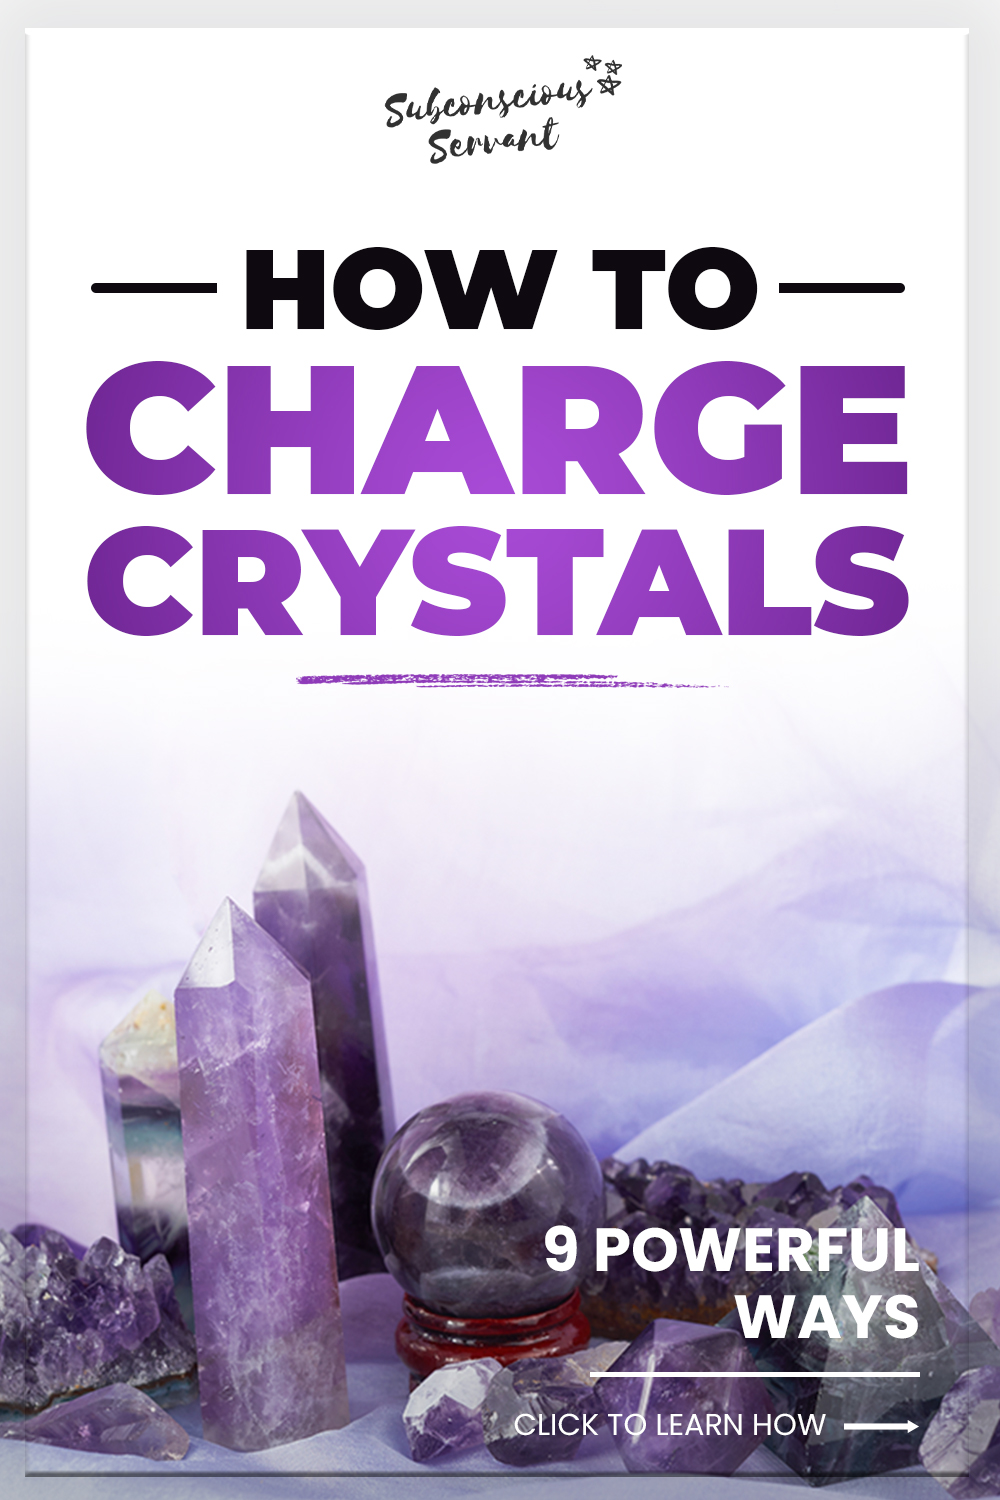 How To Charge Crystals (9 Powerful Ways)